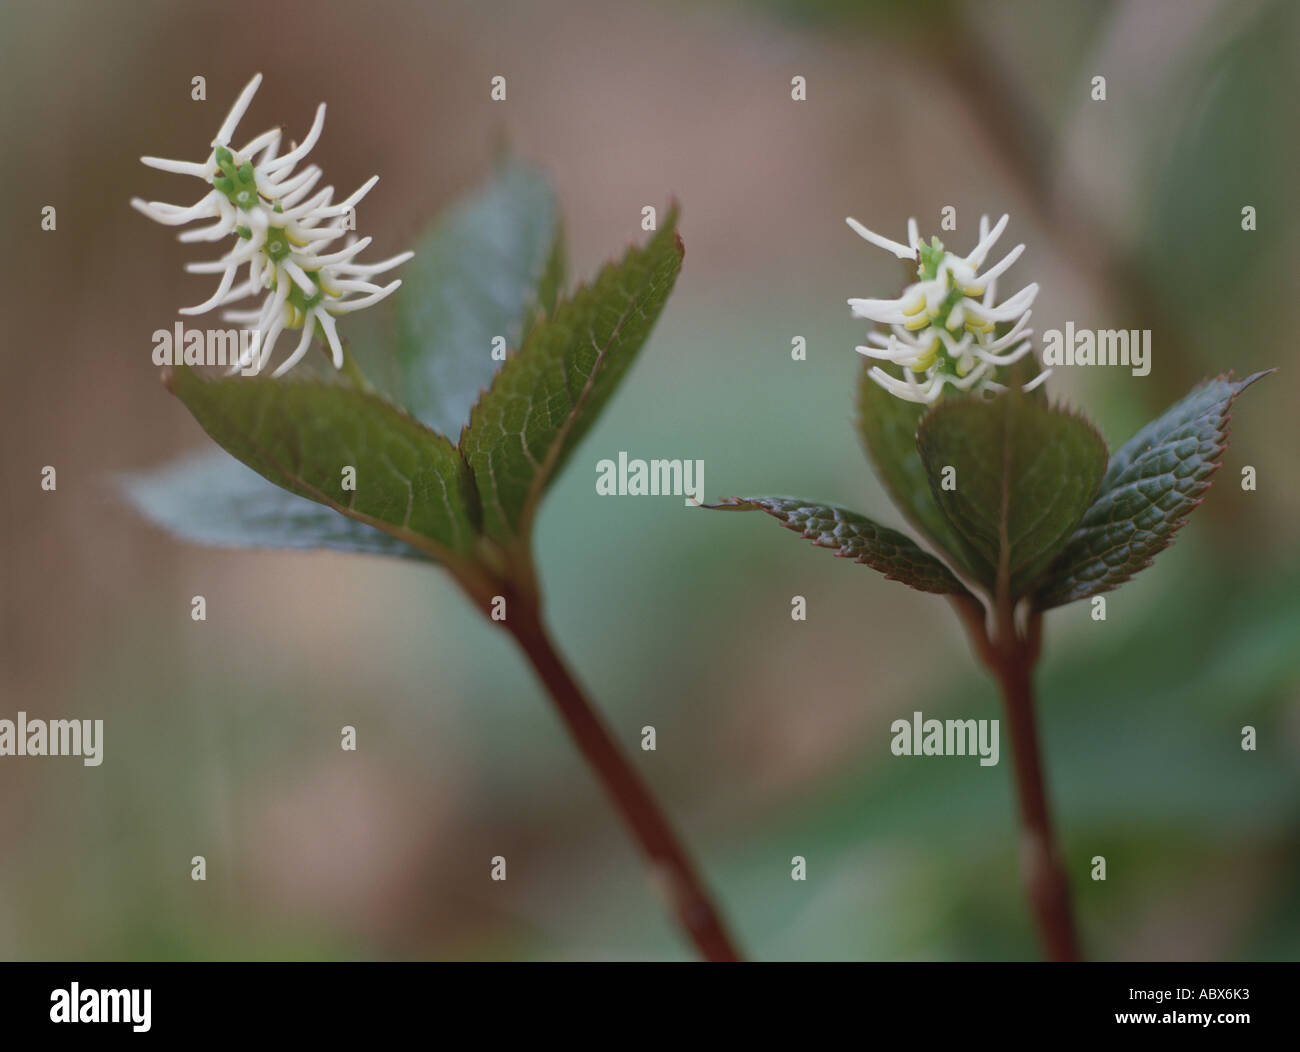 Close up of white flower chloranthus japonicus Stock Photo